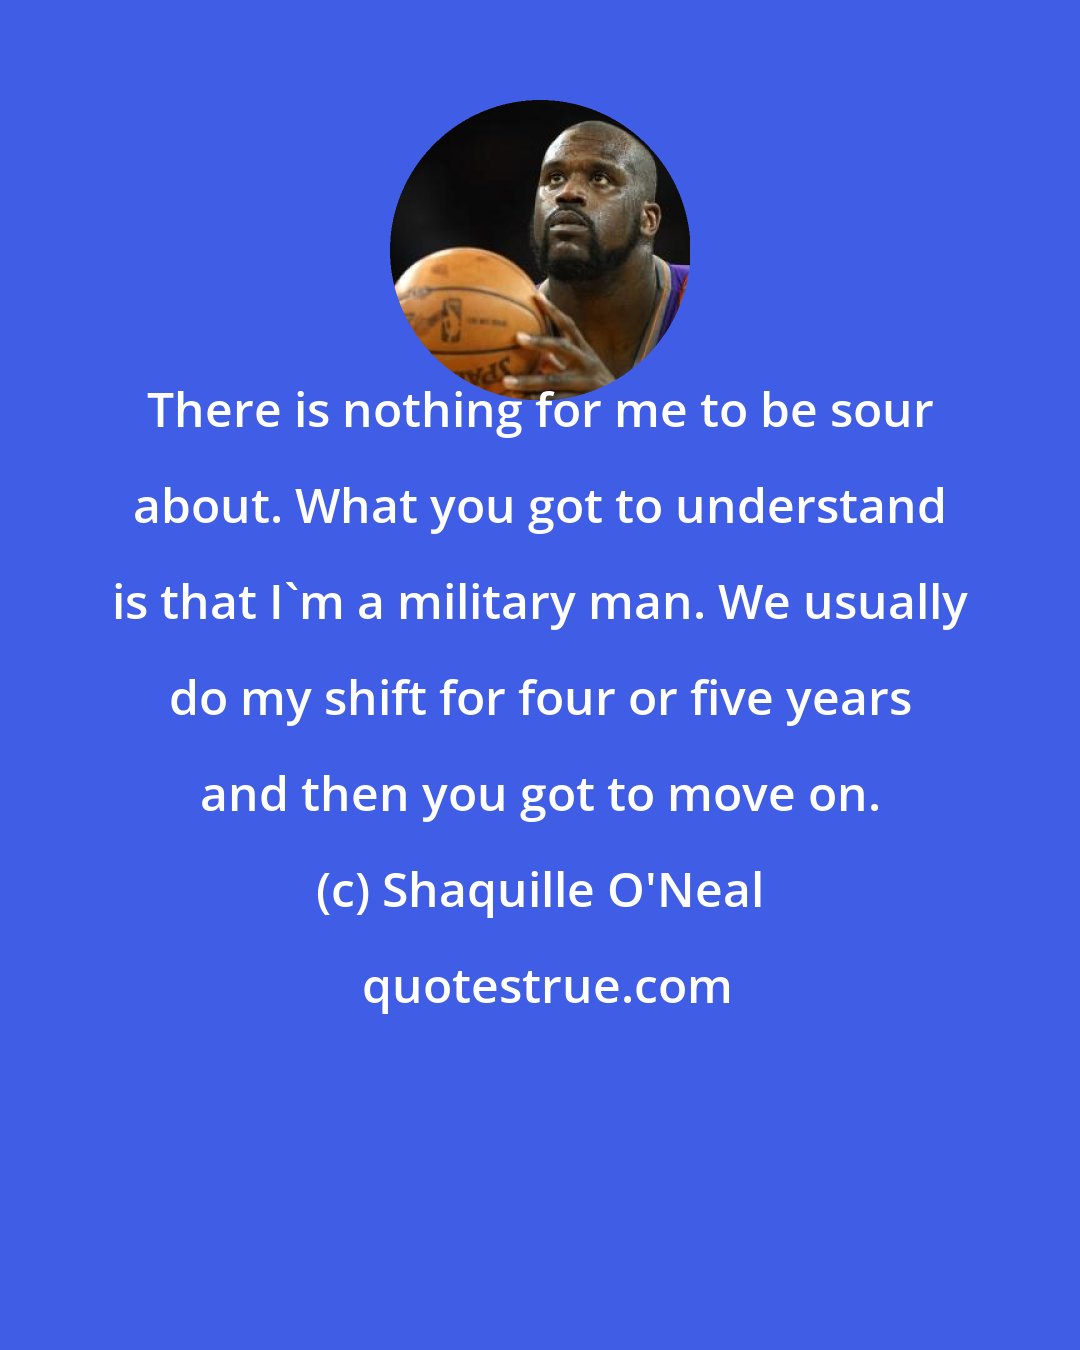 Shaquille O'Neal: There is nothing for me to be sour about. What you got to understand is that I'm a military man. We usually do my shift for four or five years and then you got to move on.